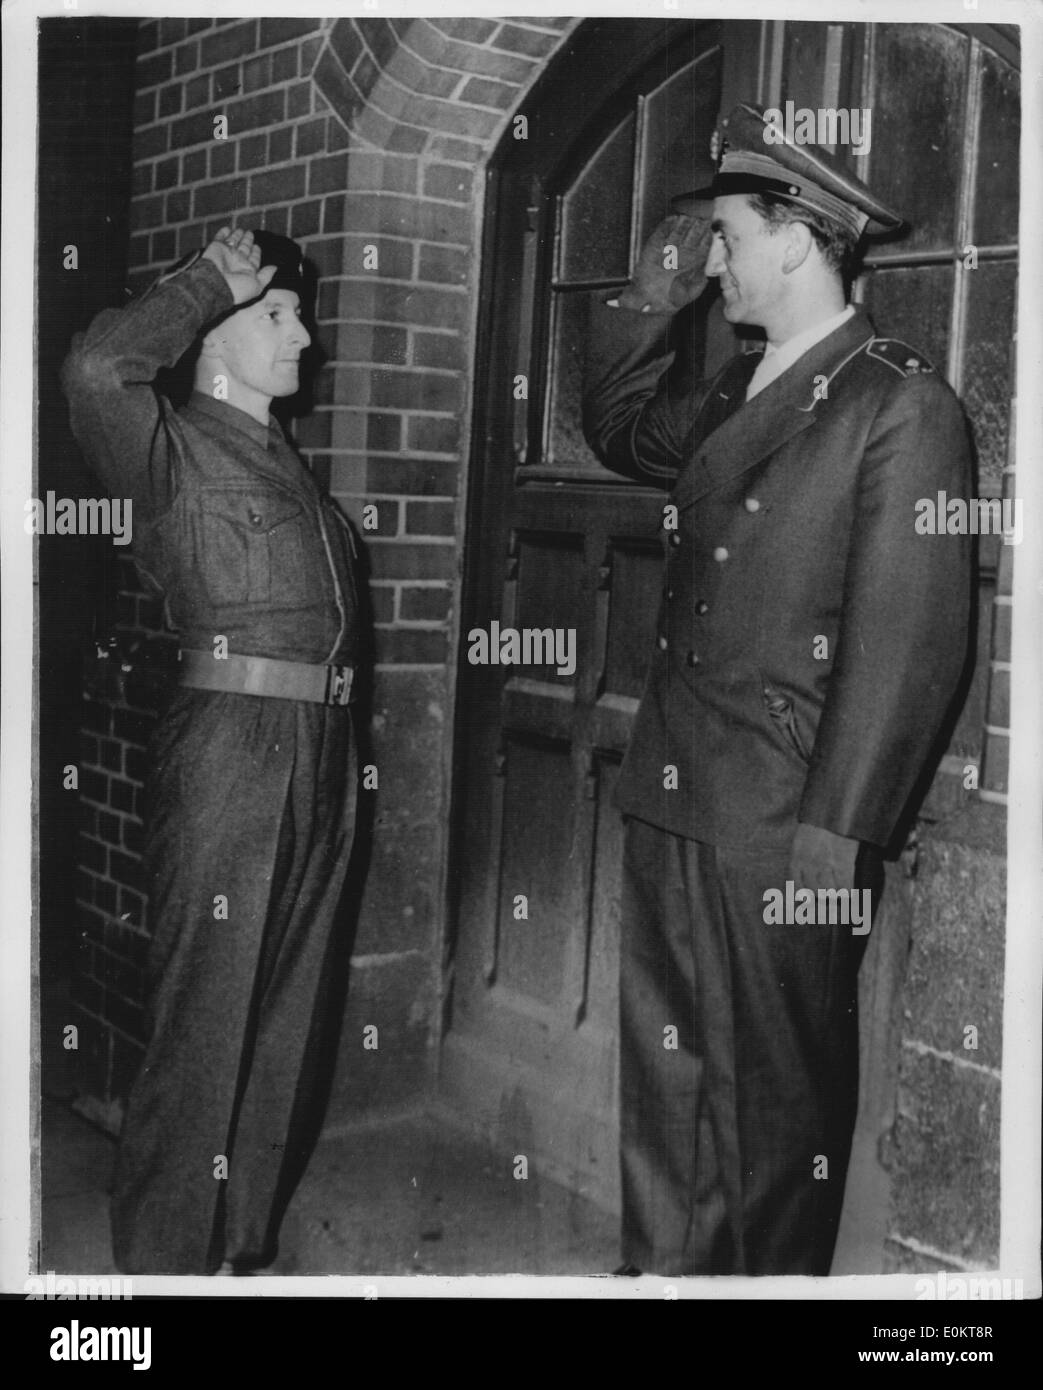 Jan 1, 1950 - British Soldier Salutes Officer Of The New German Army. First Pictures: Photo shows CPL S. J. Walters, of the 1st. South Wales Borderers, saluting an officer (Major), of the new German Army, in the strets of Bonn this evening. This is the first picture of an Allied soldier saluting a new German officer. (exact date unknown) Stock Photo